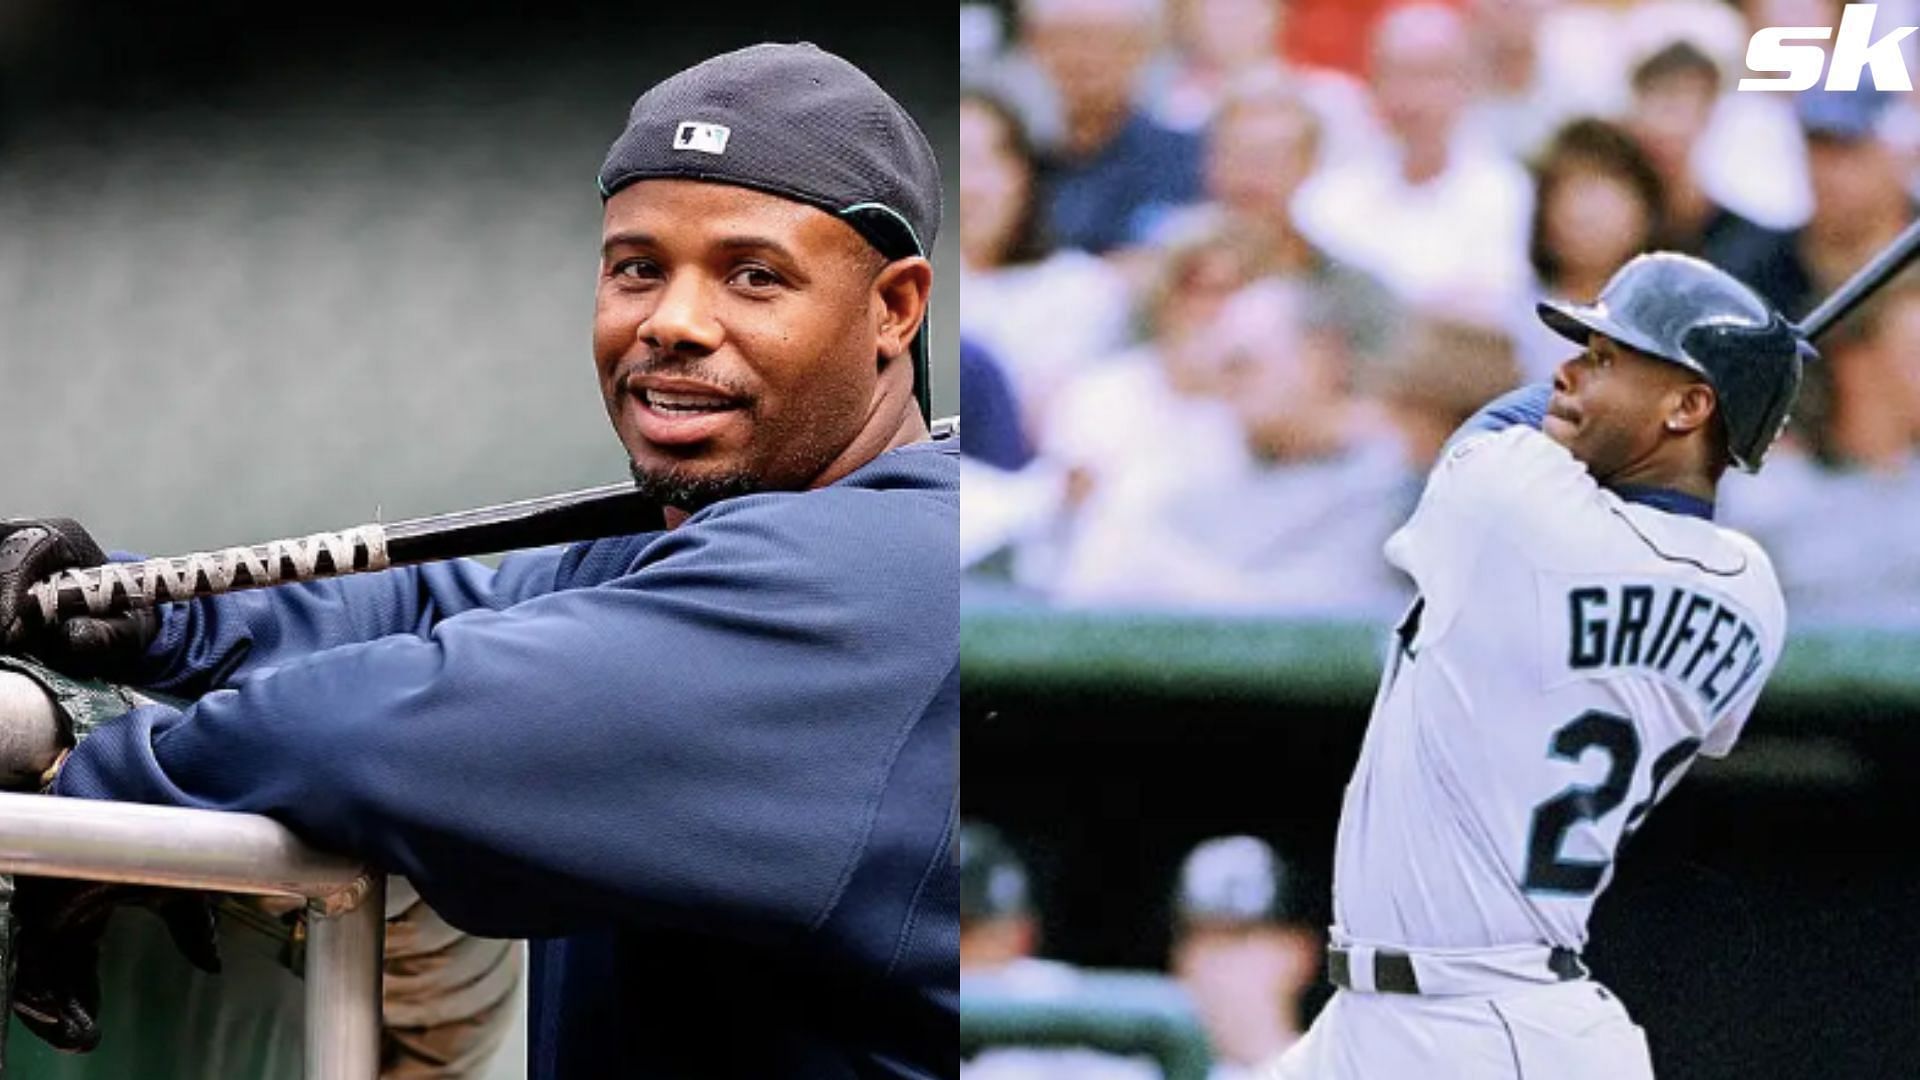 Twitter reacts to Ken Griffey Jr.'s new career as photographer at